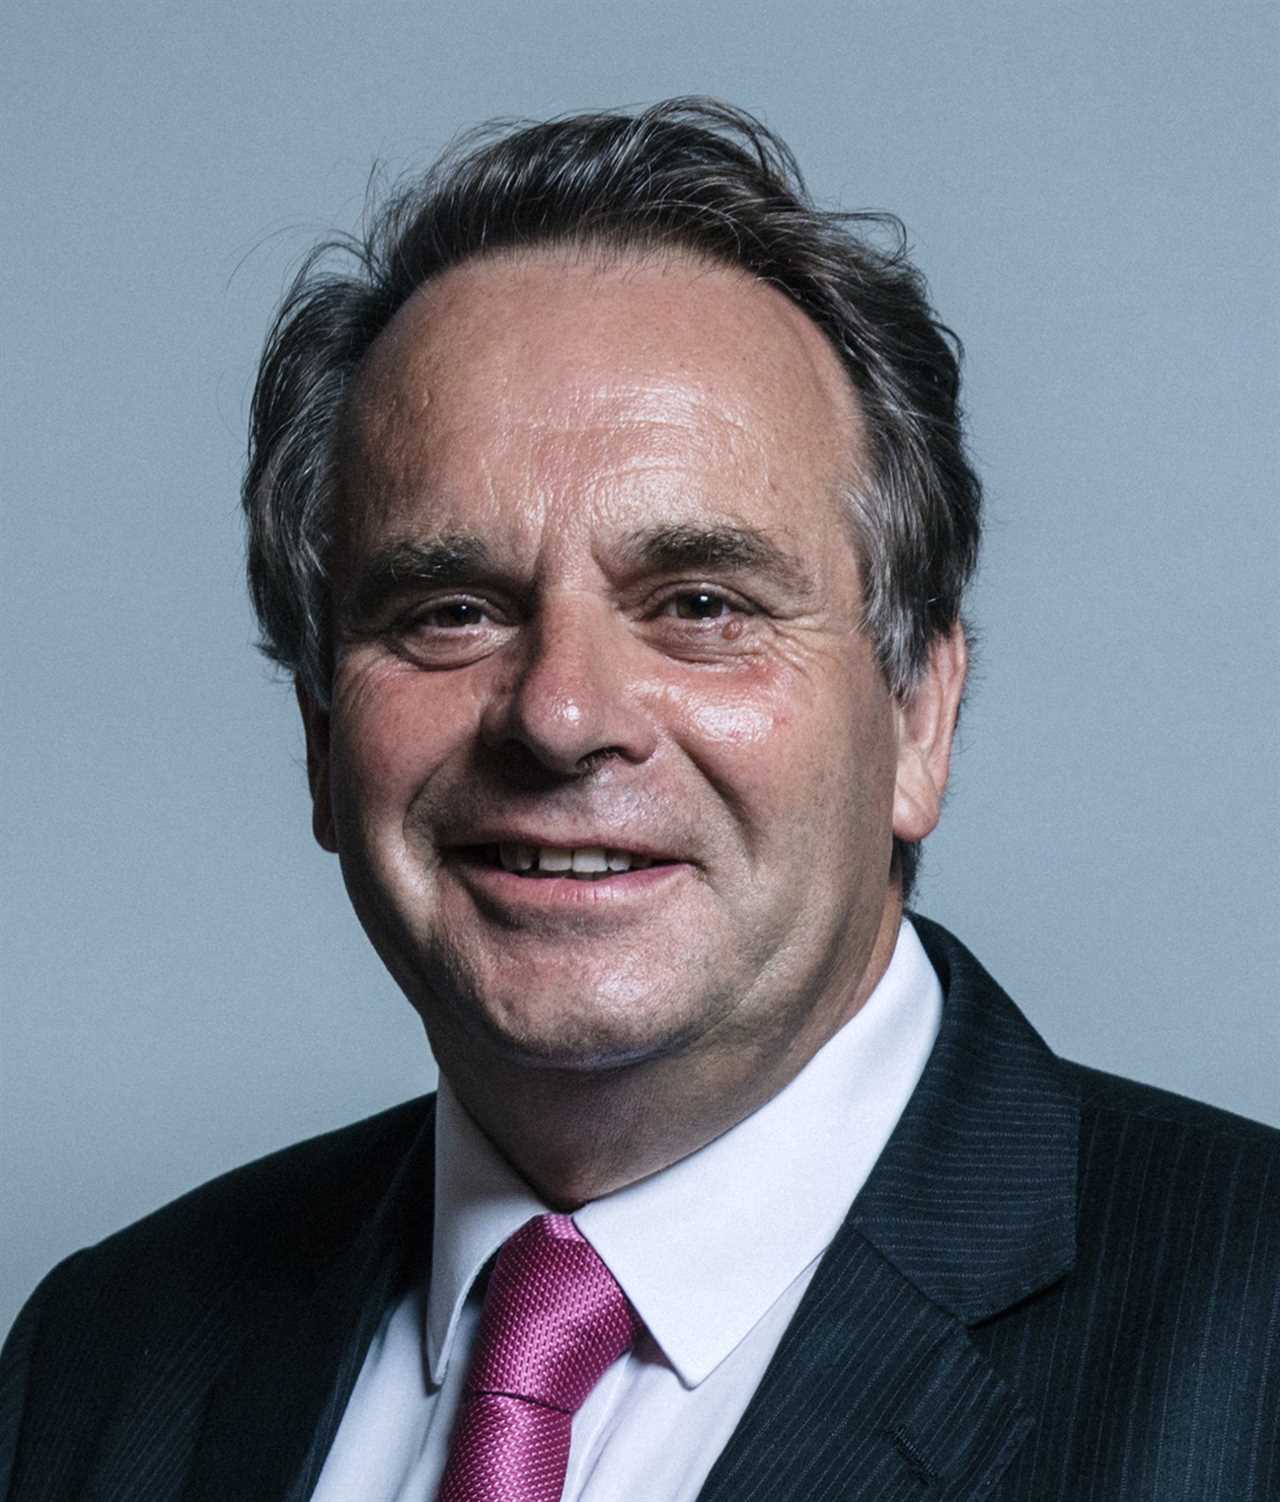 Porn-watching ex-Tory MP Neil Parish could stand as an independent in by-election he triggered by quitting in disgrace